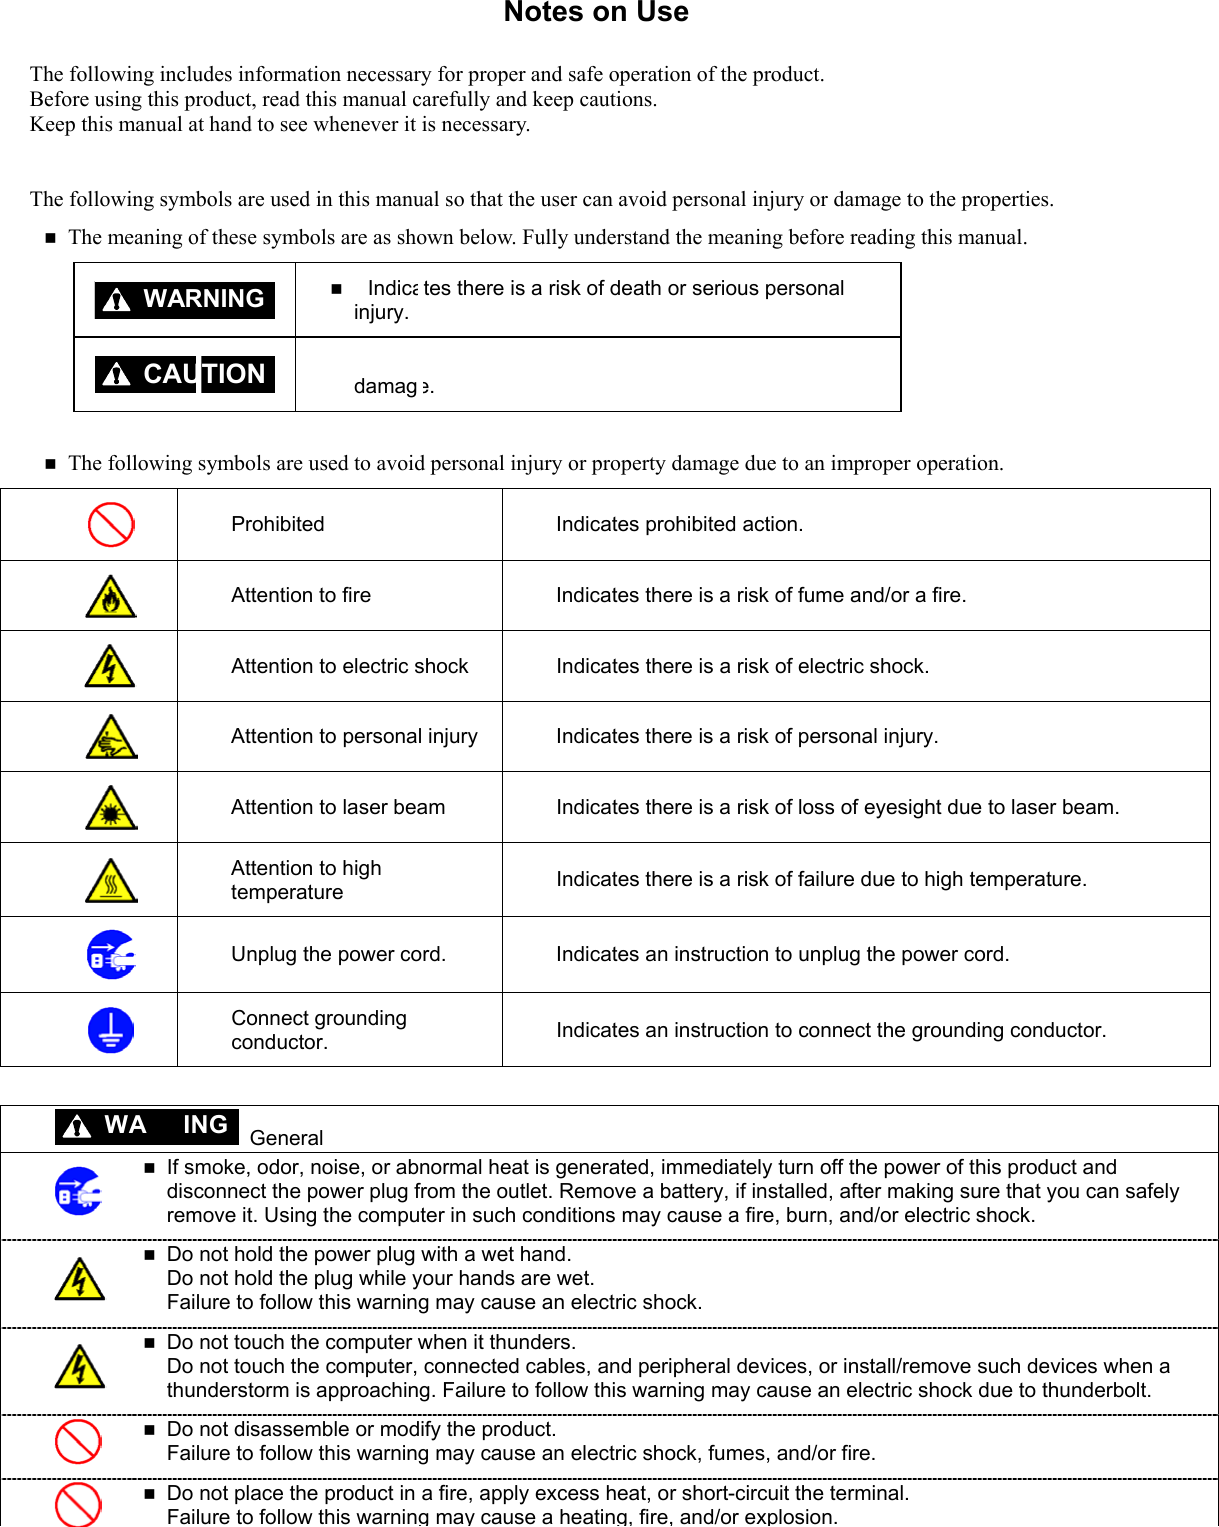 Notes on Use The following includes information necessary for proper and safe operation of the product. Before using this product, read this manual carefully and keep cautions. Keep this manual at hand to see whenever it is necessary.  The following symbols are used in this manual so that the user can avoid personal injury or damage to the properties.  The meaning of these symbols are as shown below. Fully understand the meaning before reading this manual.    Indicates there is a risk of death or serious personal injury.    Indicates there is a risk of personal injury or property damage. WARNINGCAUTION Prohibited  Indicates prohibited action.  Attention to fire  Indicates there is a risk of fume and/or a fire.  Attention to electric shock  Indicates there is a risk of electric shock.  Attention to personal injury  Indicates there is a risk of personal injury.  Attention to laser beam  Indicates there is a risk of loss of eyesight due to laser beam.  Attention to high temperature  Indicates there is a risk of failure due to high temperature.  Unplug the power cord.  Indicates an instruction to unplug the power cord.  Connect grounding conductor.  Indicates an instruction to connect the grounding conductor.   The following symbols are used to avoid personal injury or property damage due to an improper operation. RN  General   If smoke, odor, noise, or abnormal heat is generated, immediately turn off the power of this product and disconnect the power plug from the outlet. Remove a battery, if installed, after making sure that you can safely remove it. Using the computer in such conditions may cause a fire, burn, and/or electric shock.   Do not hold the power plug with a wet hand. Do not hold the plug while your hands are wet.   Failure to follow this warning may cause an electric shock.   Do not touch the computer when it thunders. Do not touch the computer, connected cables, and peripheral devices, or install/remove such devices when a thunderstorm is approaching. Failure to follow this warning may cause an electric shock due to thunderbolt.   Do not disassemble or modify the product. Failure to follow this warning may cause an electric shock, fumes, and/or fire.  Do not place the product in a fire, apply excess heat, or short-circuit the terminal. Failure to follow this warning may cause a heating, fire, and/or explosion. WA ING